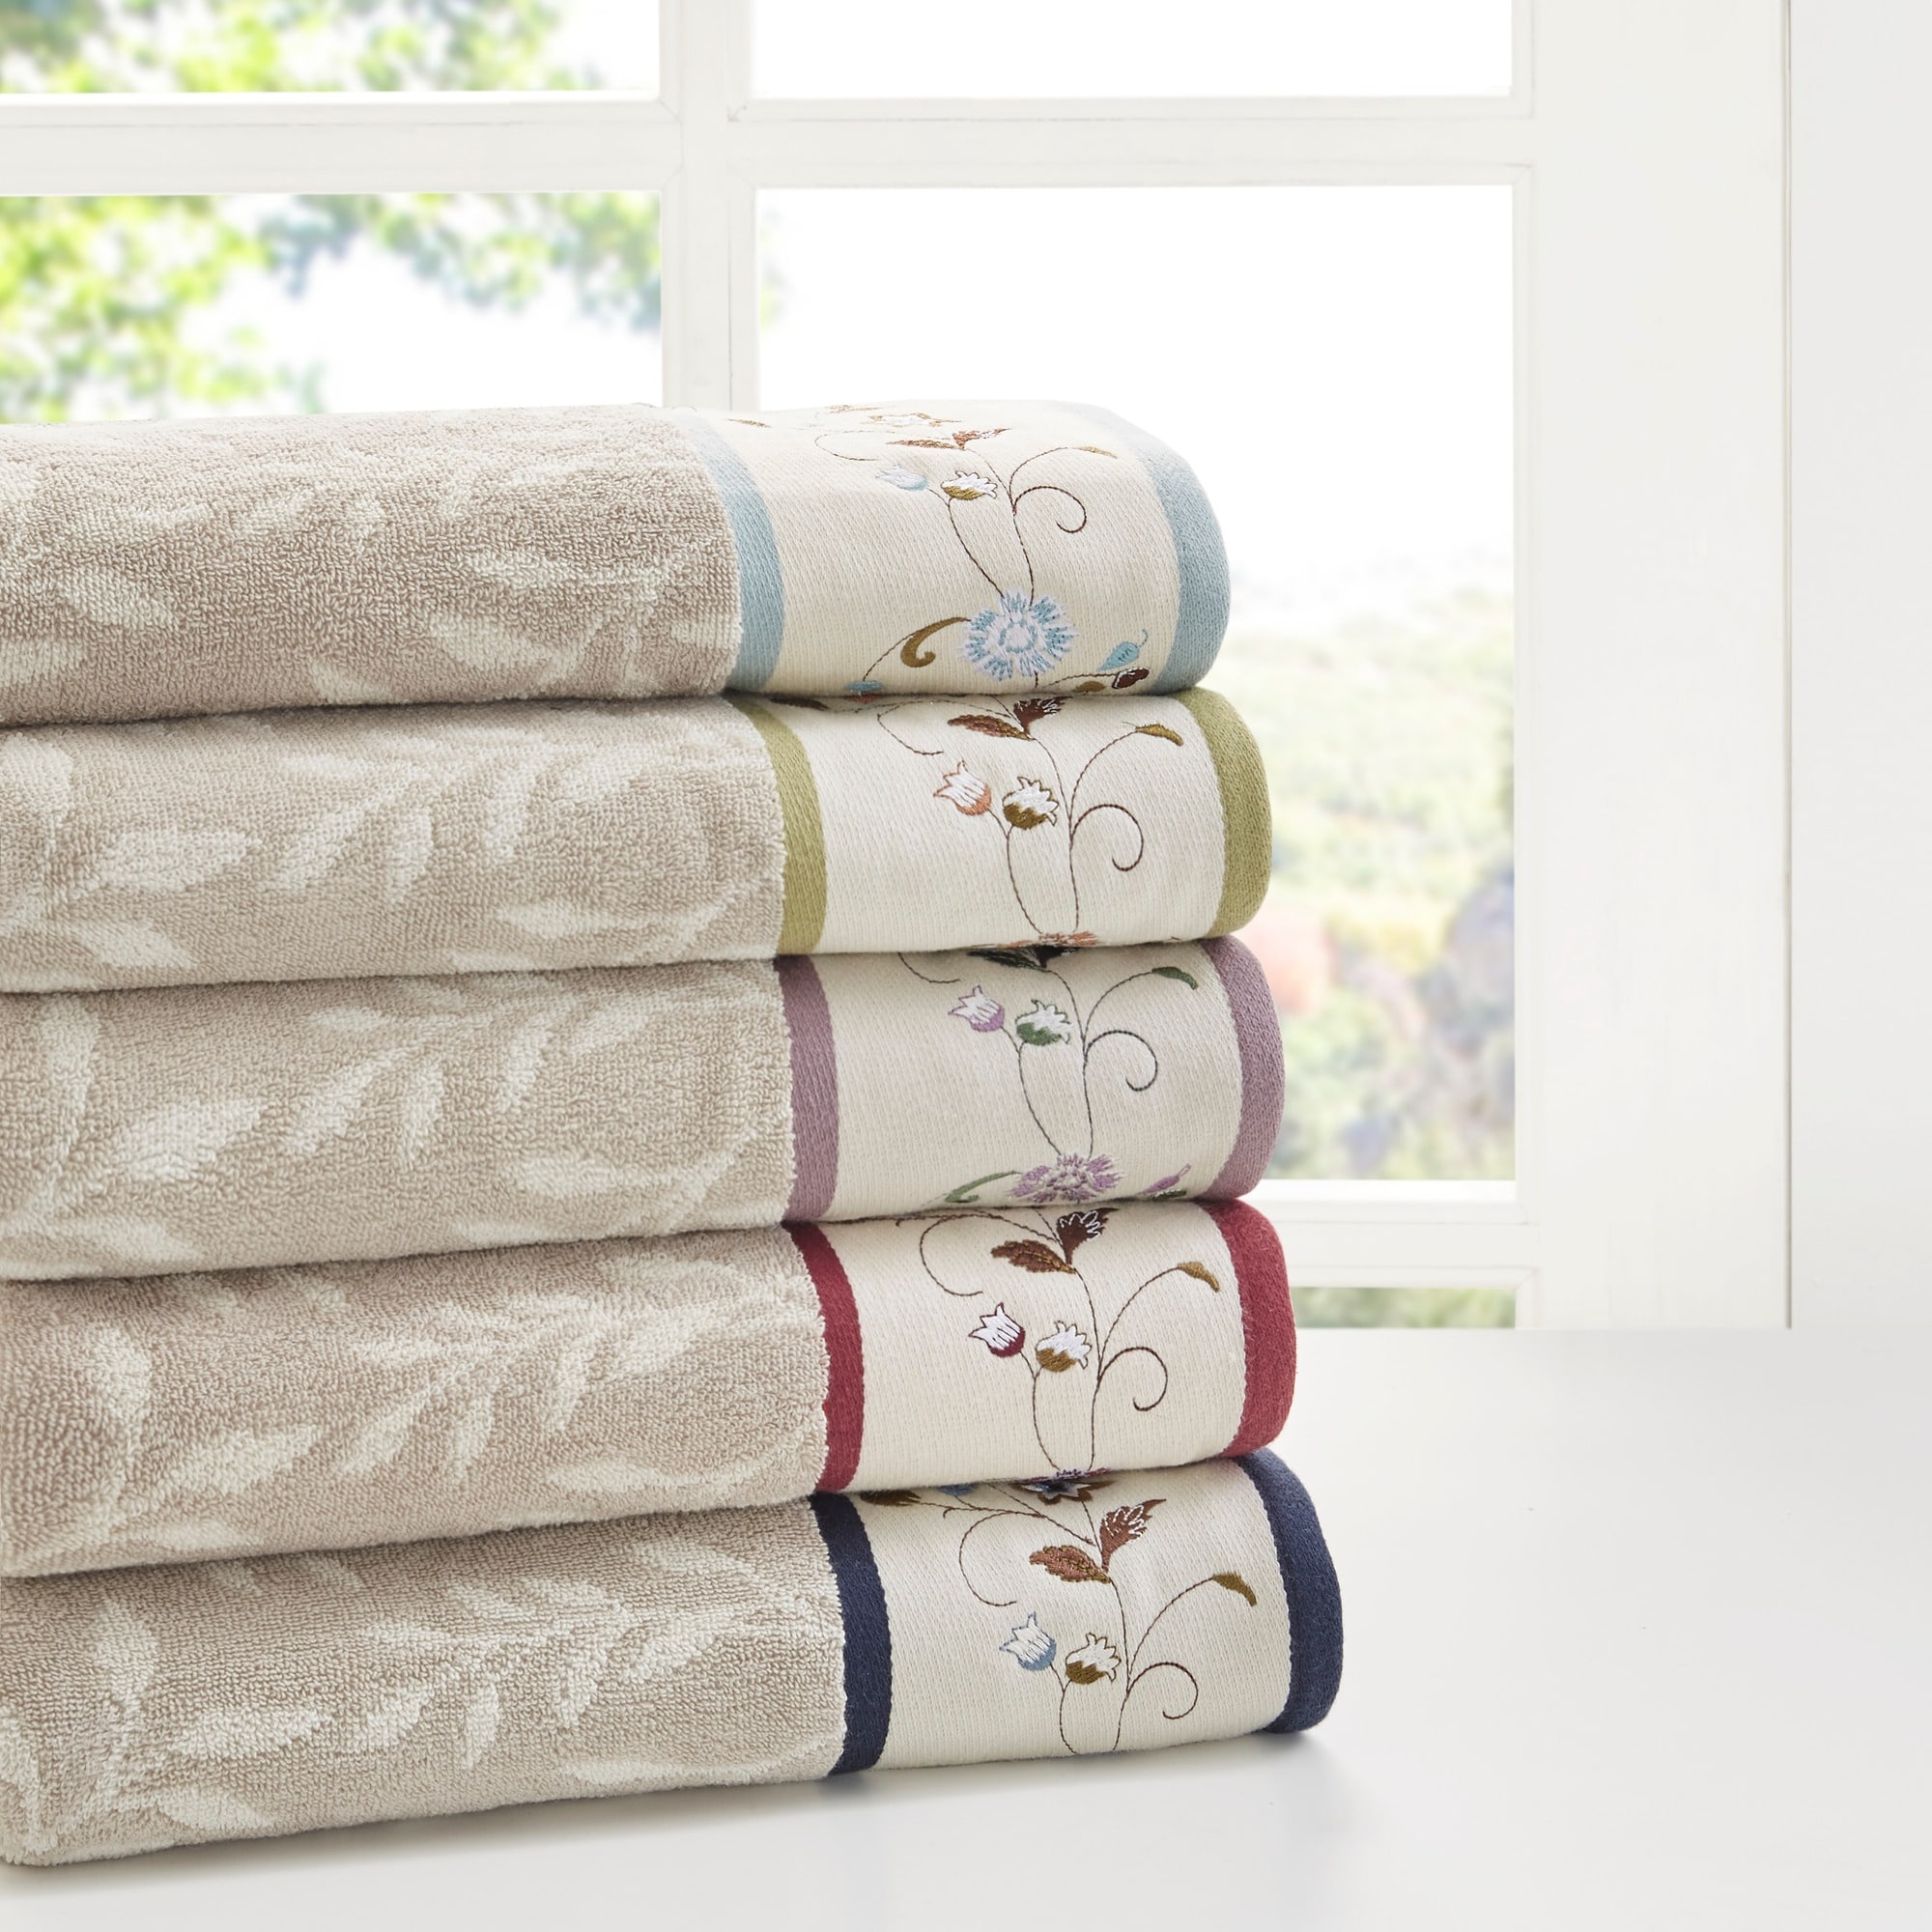 https://ak1.ostkcdn.com/images/products/is/images/direct/f9a2fcffcb6e378a57eb170b646f77026b5213fb/Madison-Park-Belle-Embroidered-Cotton-Jacquard-6-piece-Towel-Set.jpg